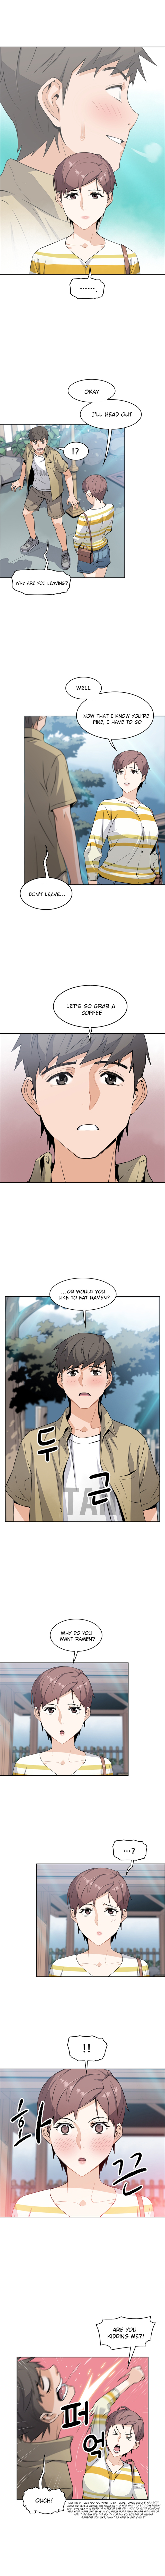 Housekeeper Manhwa - Chapter 3 Page 5